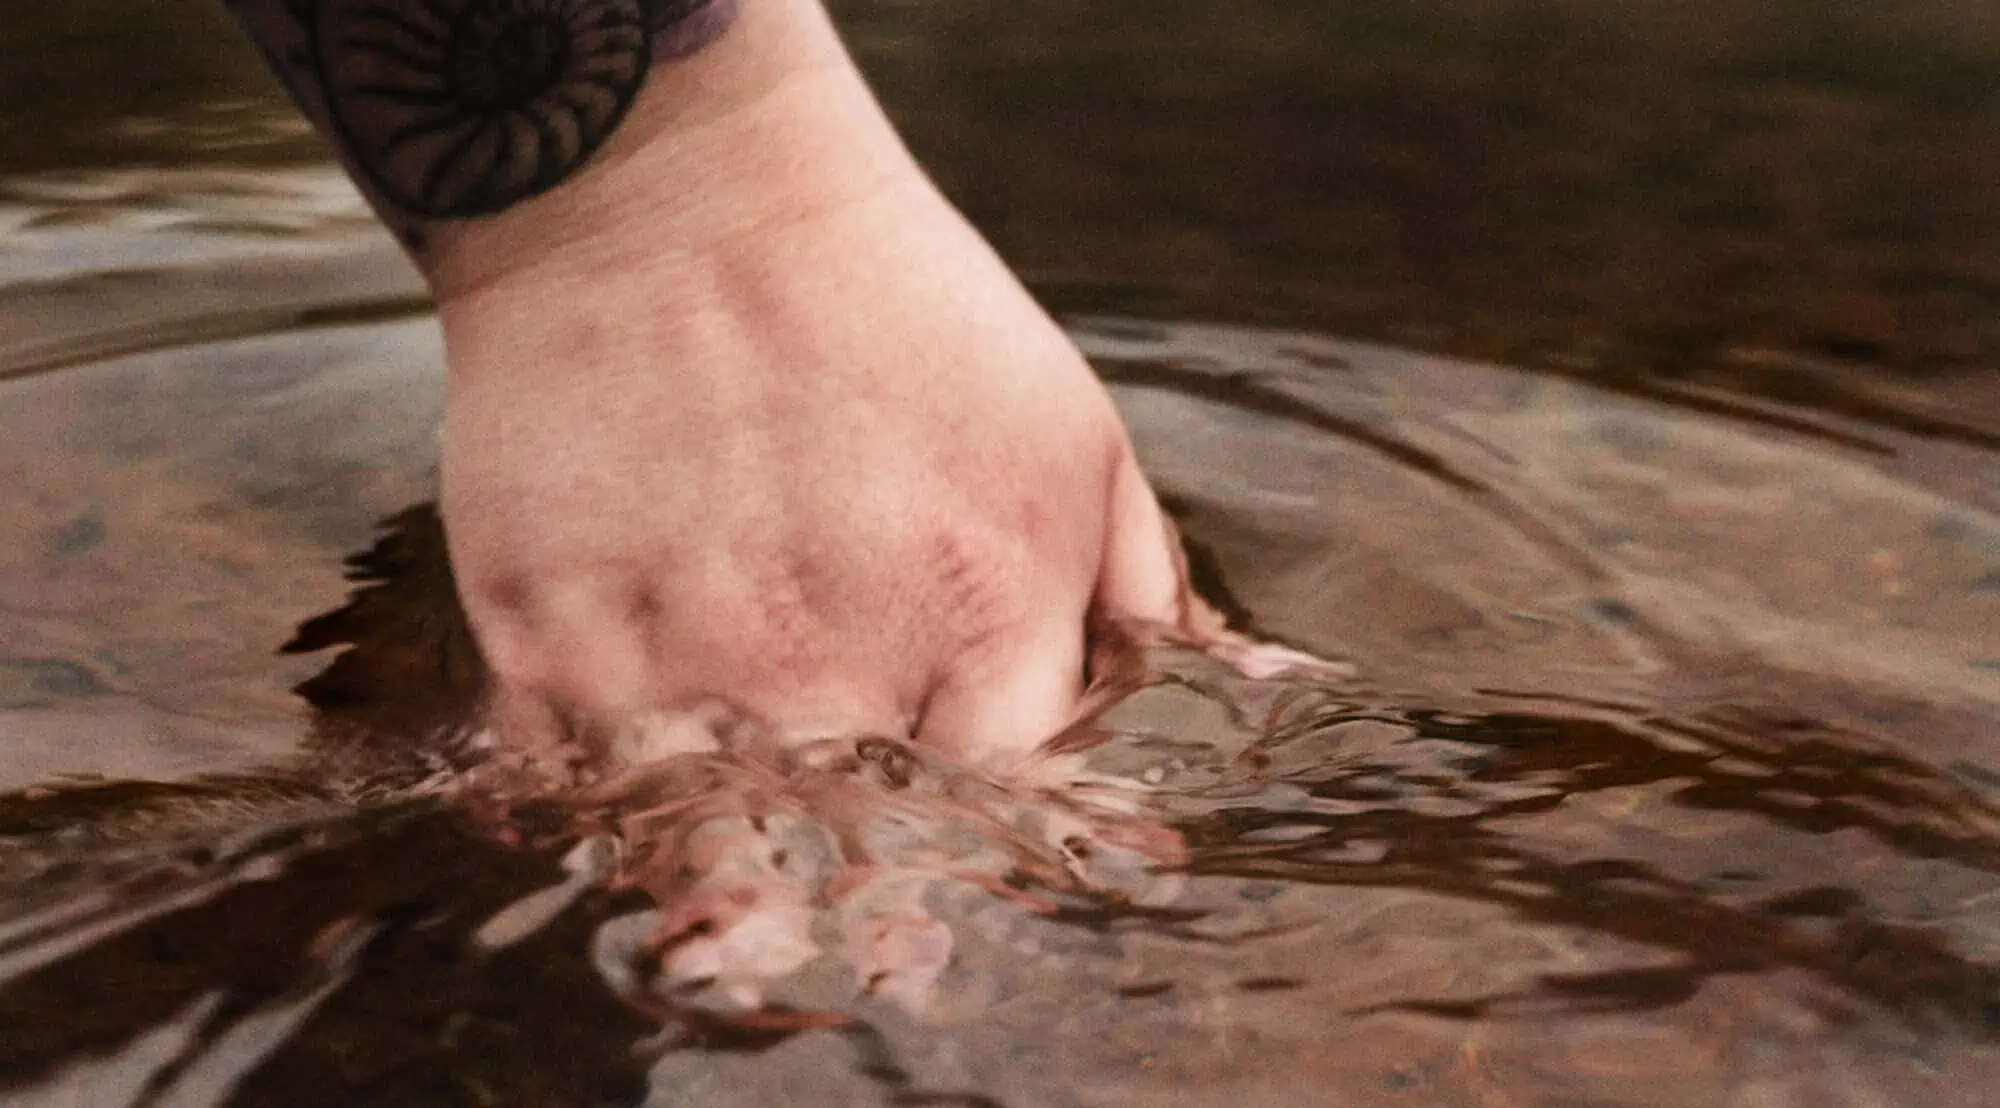 ID: A landscape image. A close up of Fay’s hand skimming the water. The water looks brown due to the bottom of the lake. There are ripples around Fay’s hand where it meets the water.